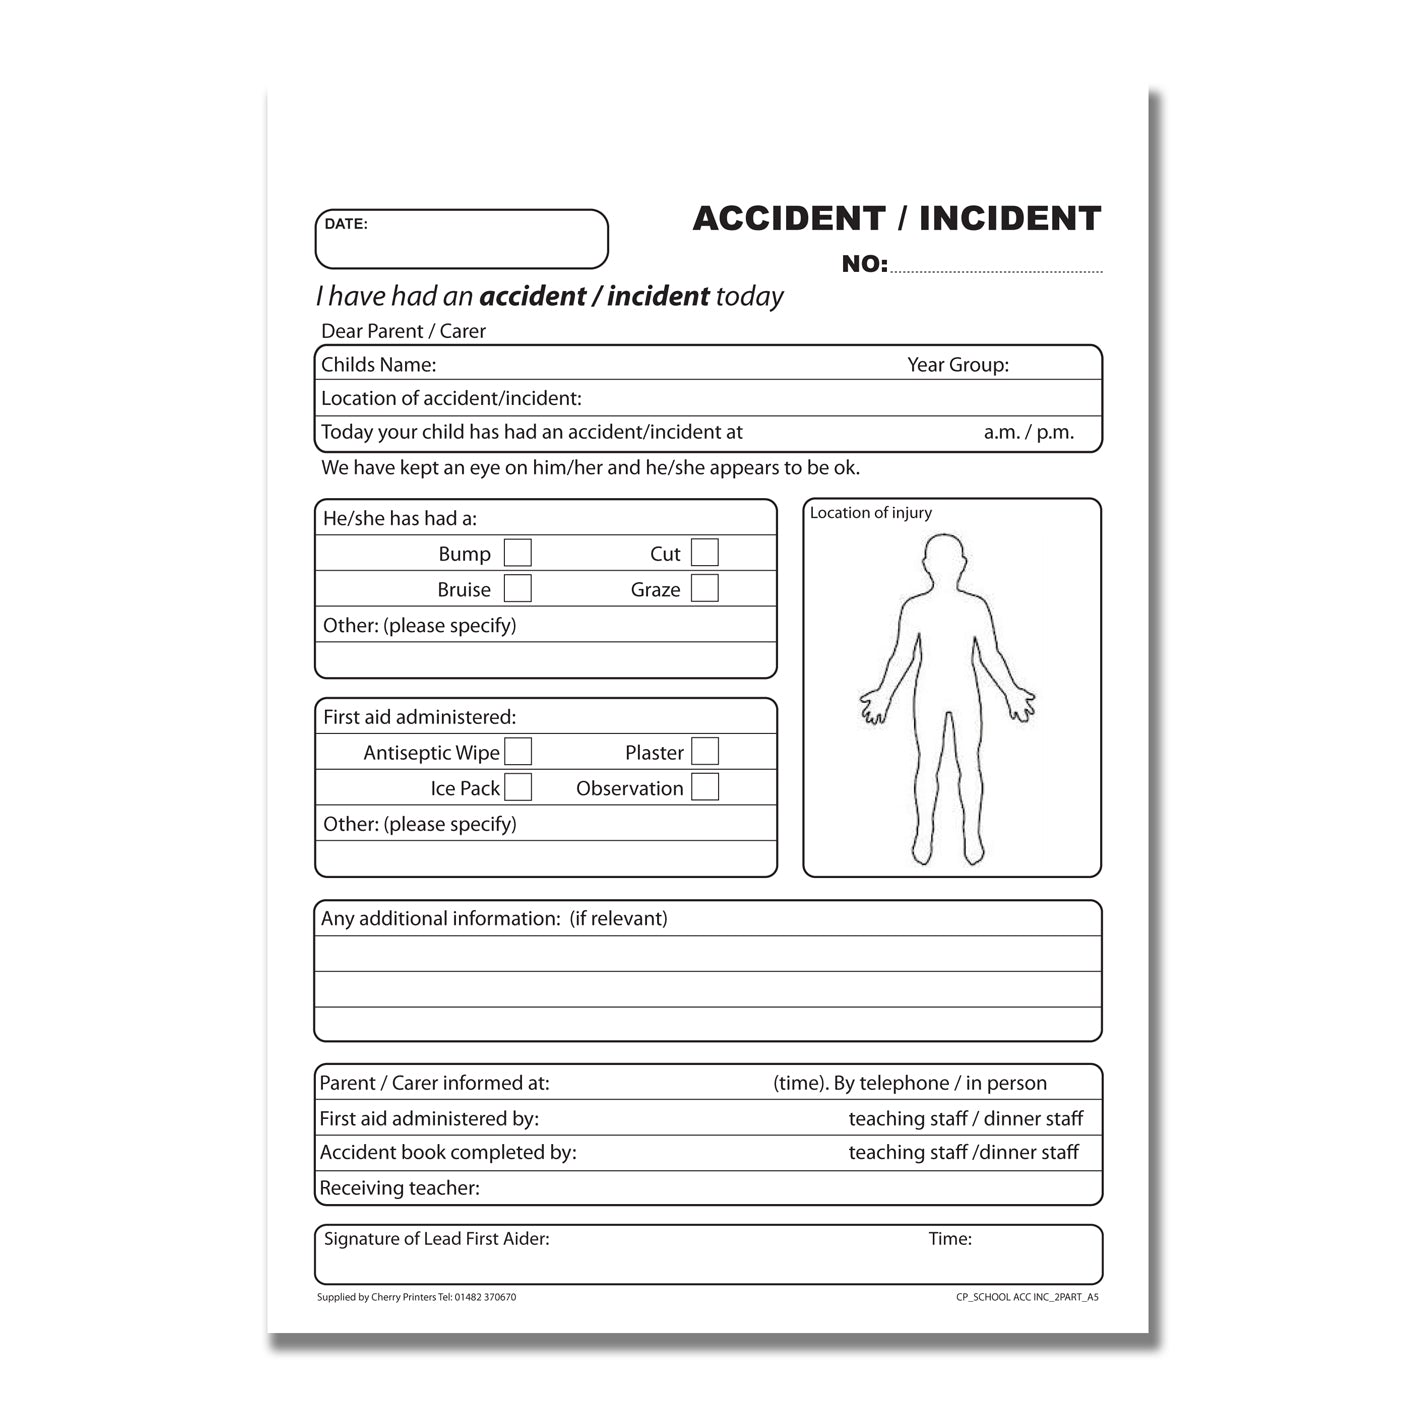 NCR School Accident /Incident Report Book A5 Duplicate